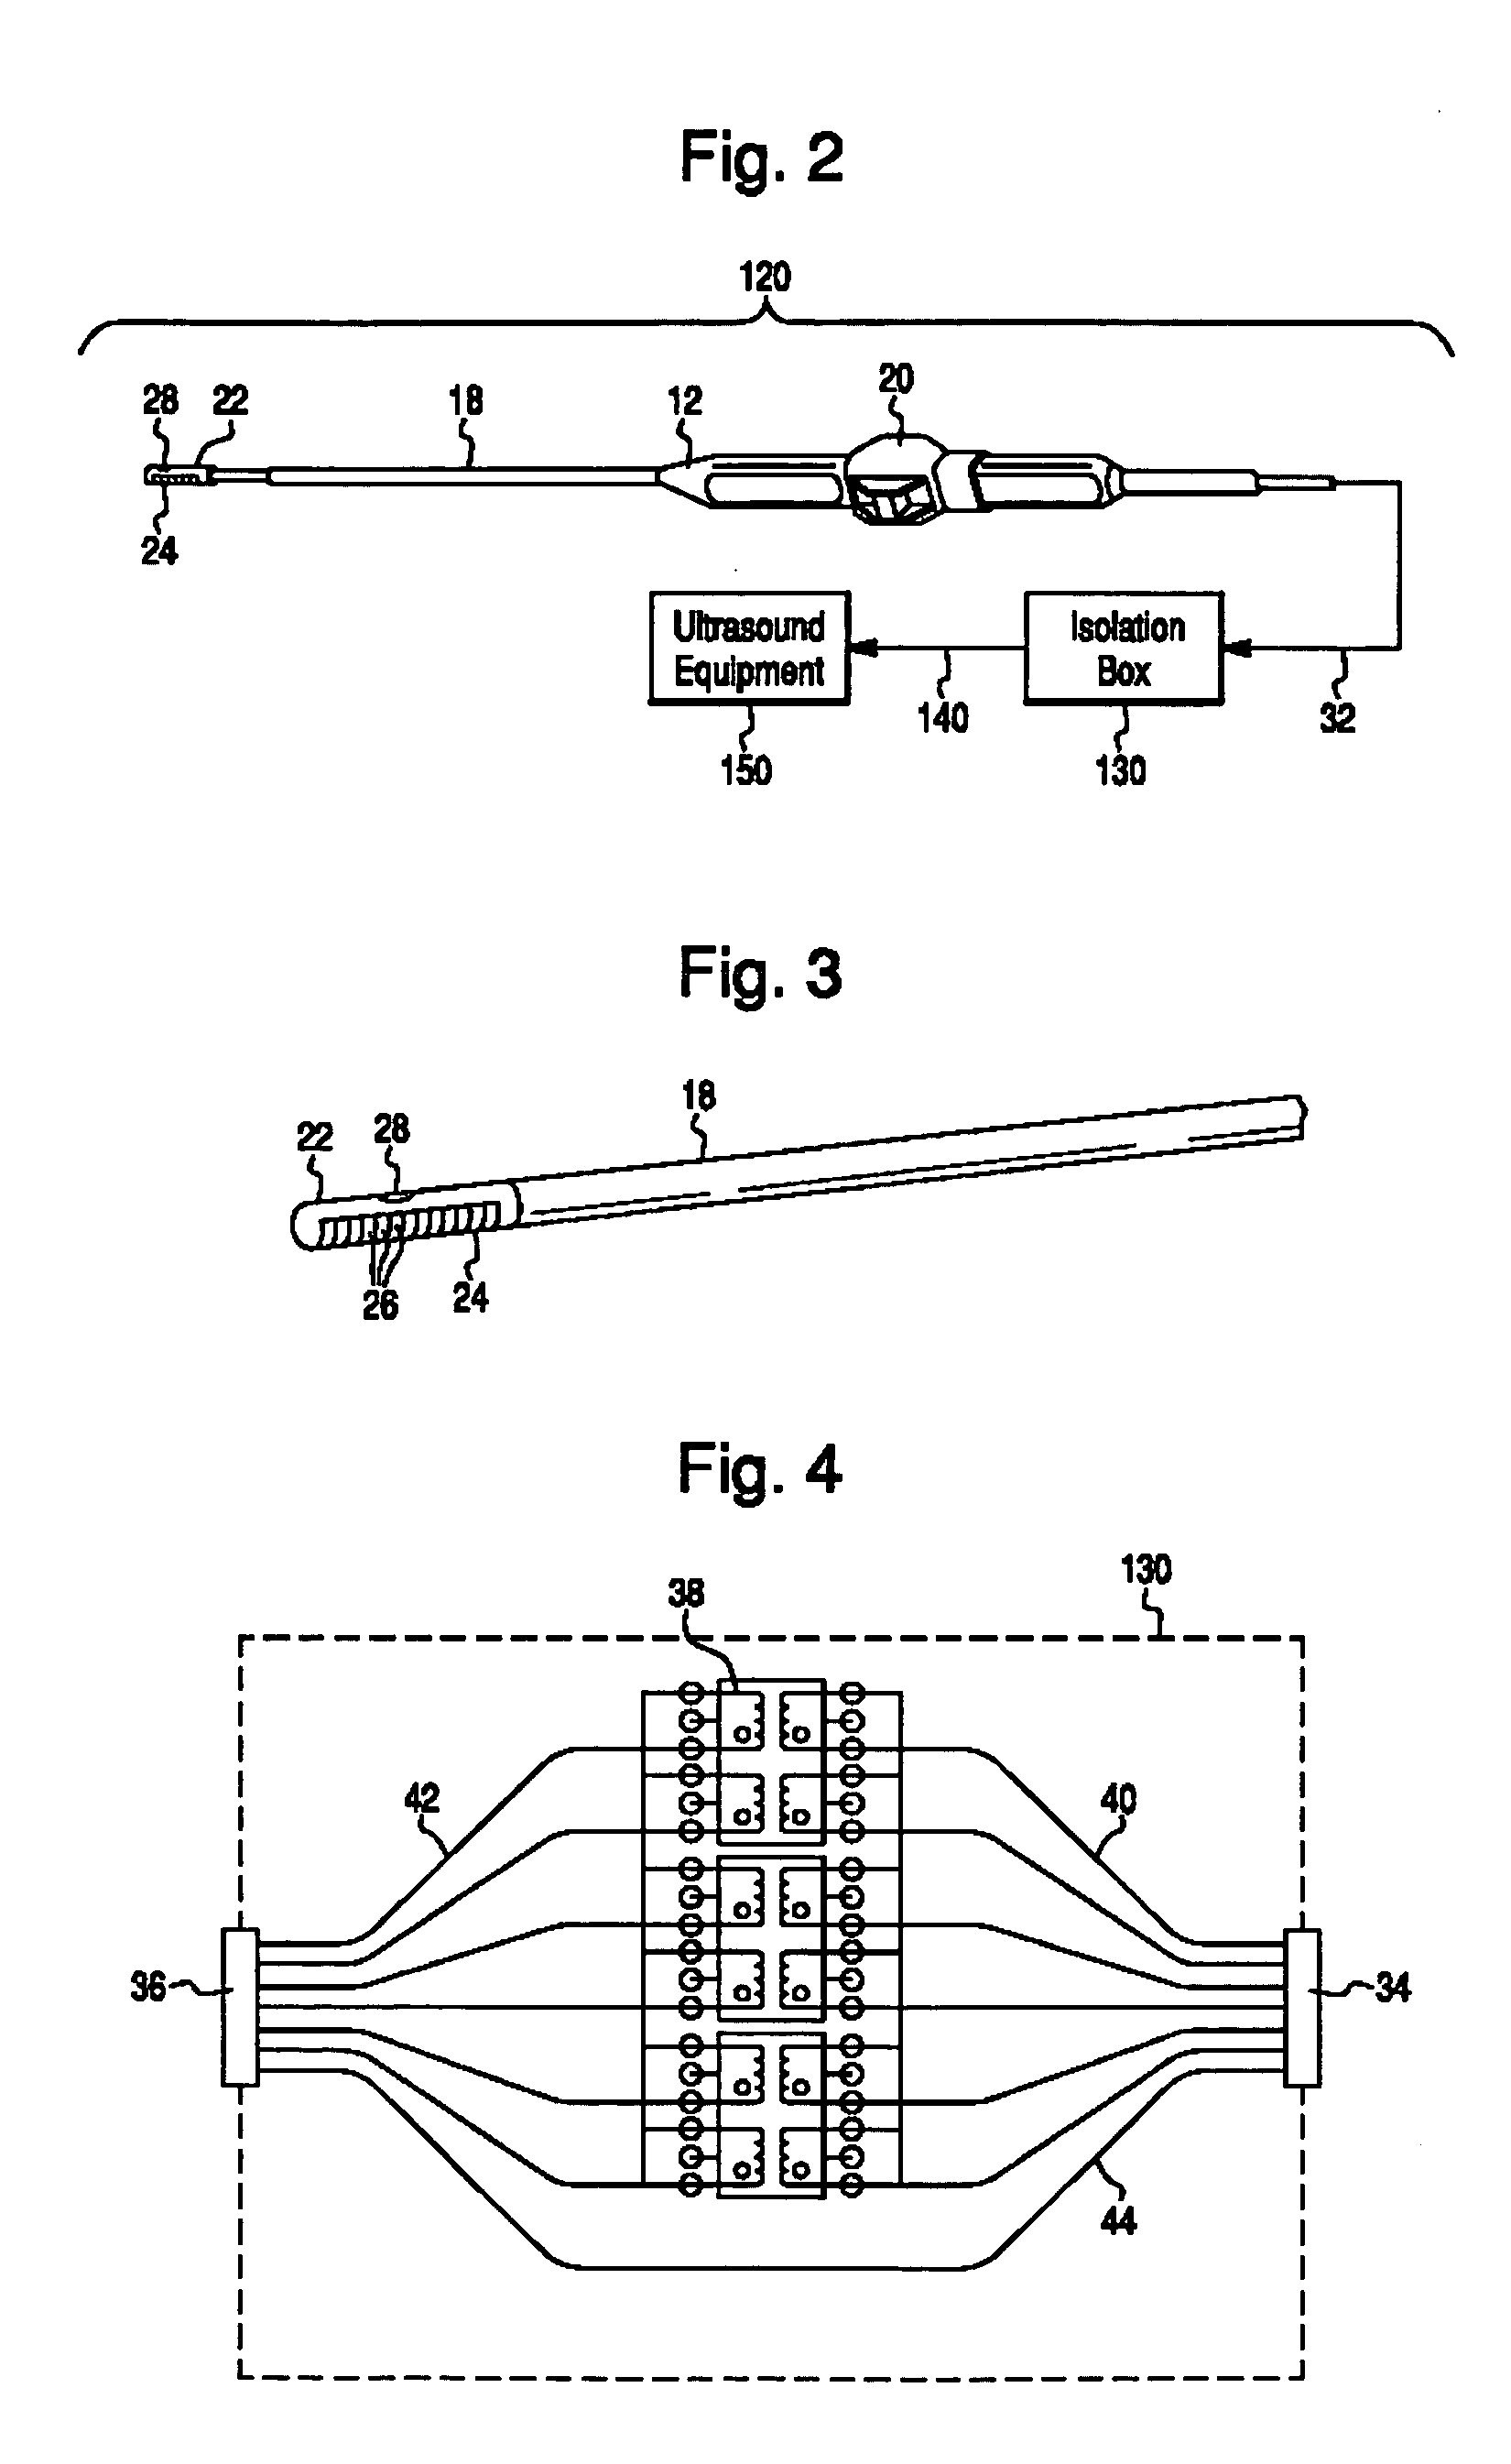 Safety systems and methods for ensuring safe use of intra-cardiac ultrasound catheters